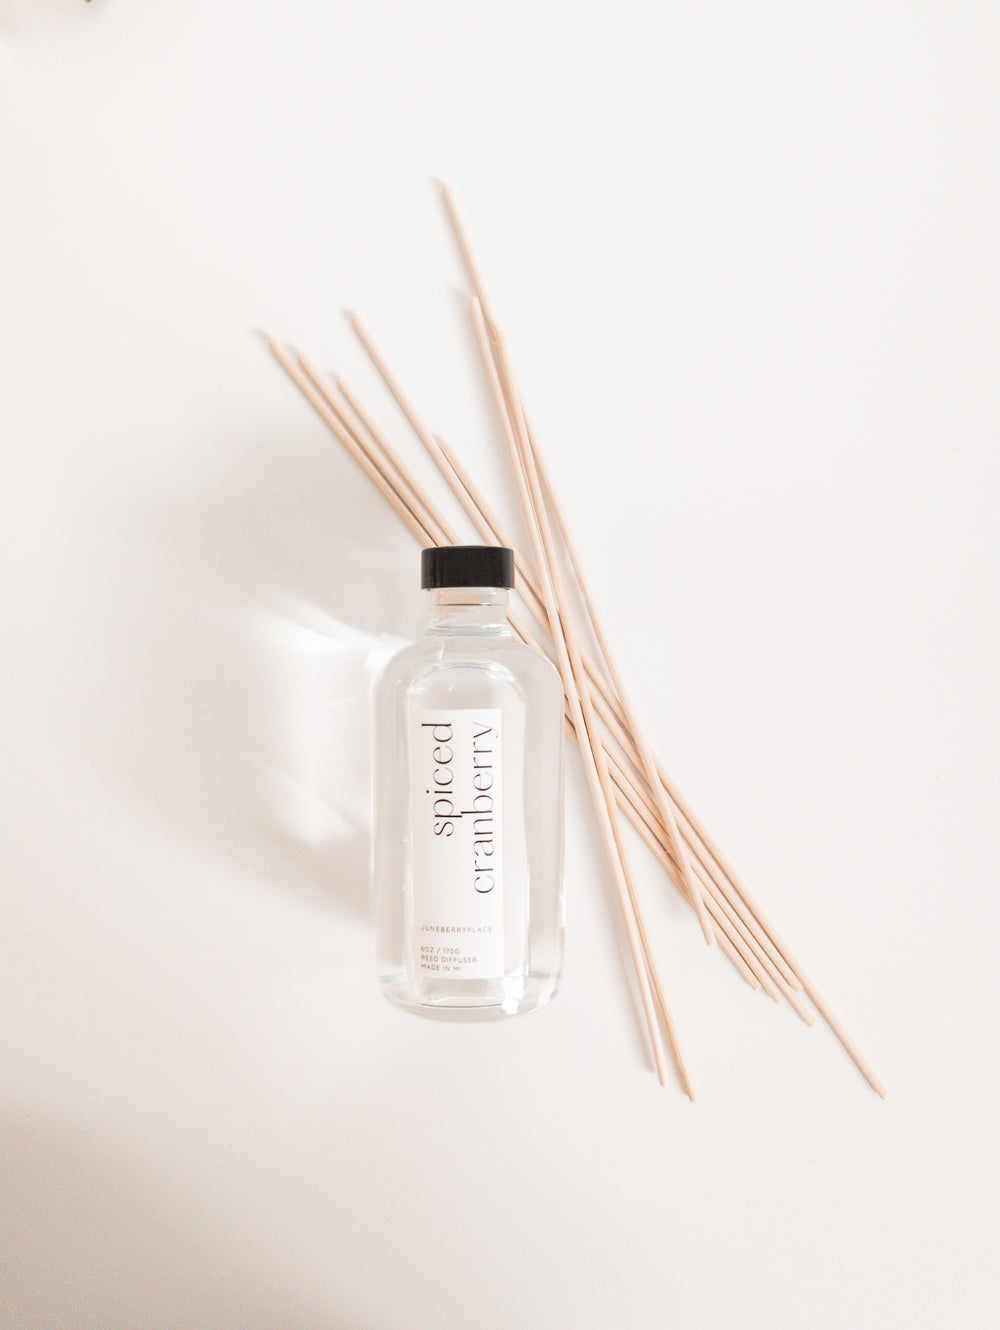 Spiced Cranberry reed diffuser: Winter delight with cranberry, blood orange, and spices. Modern clear glass, non-toxic formula. For home fragrance fans who love a clean aesthetic